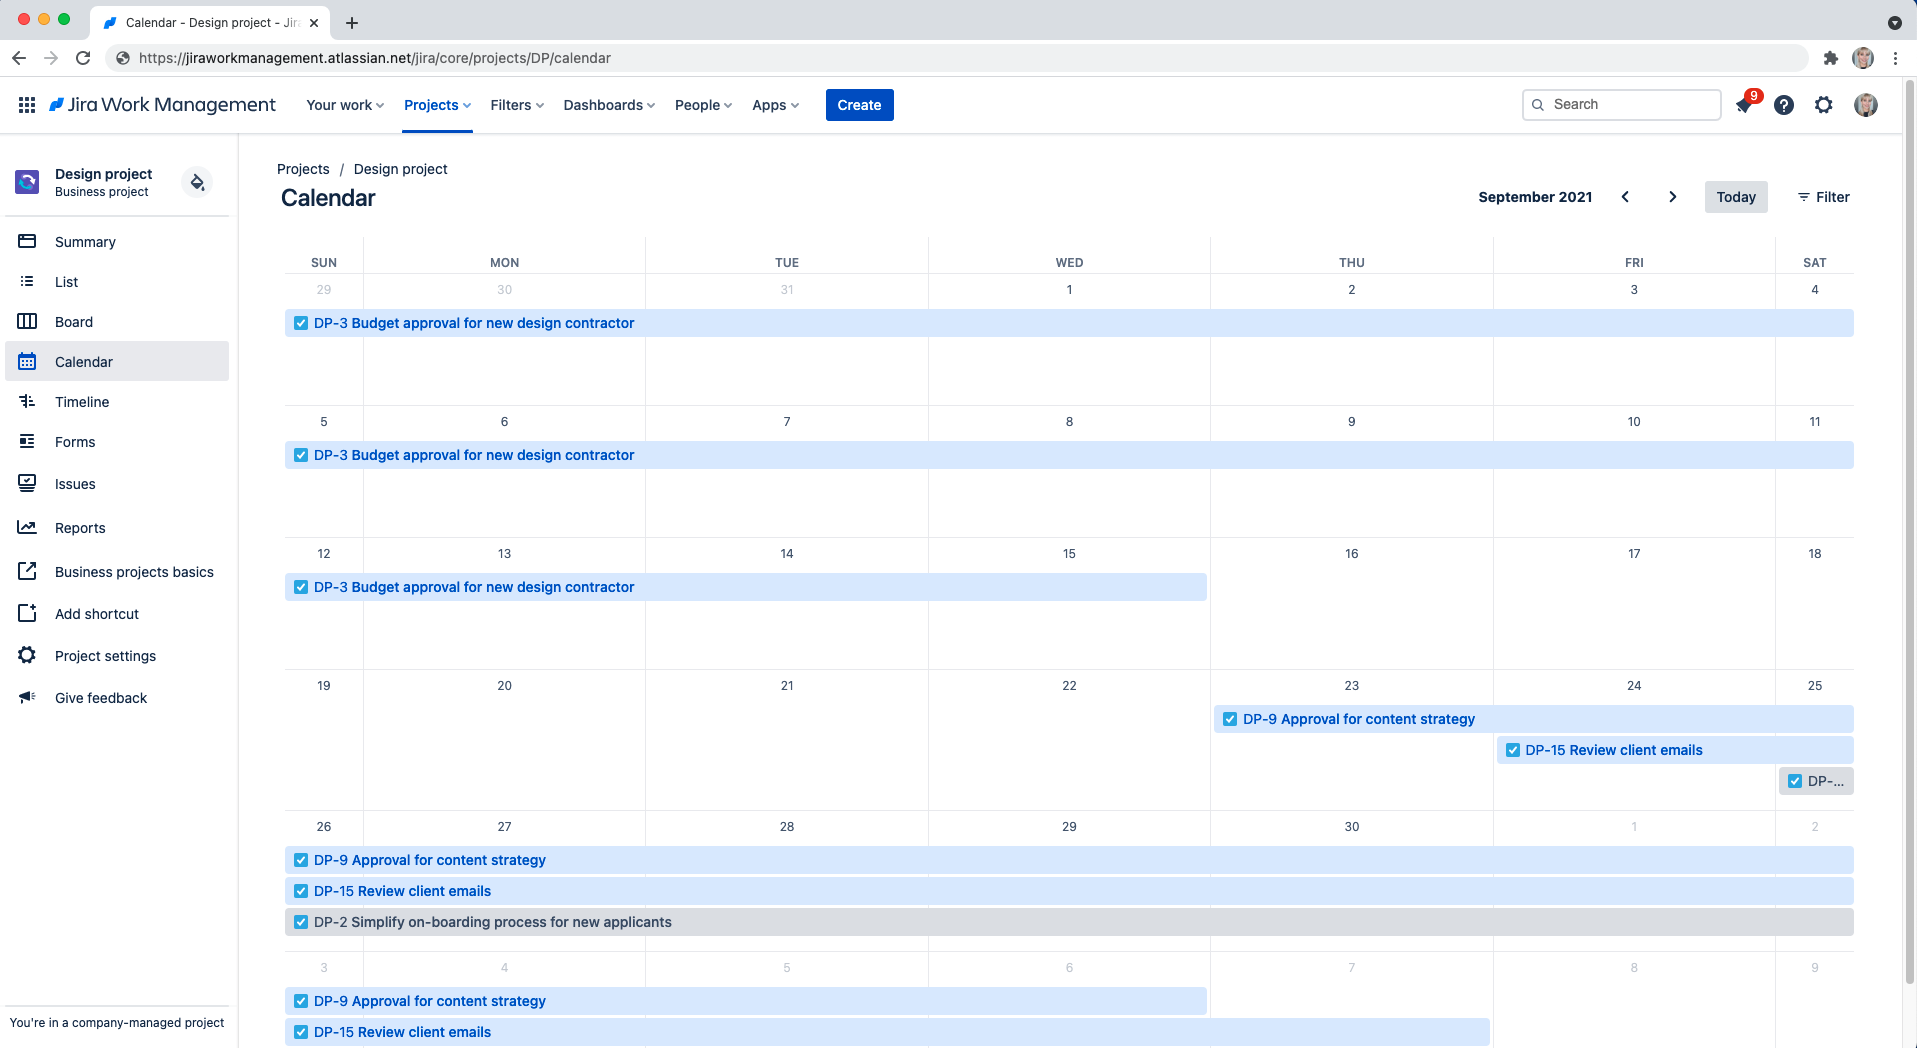 alt="This is the calendar view in Jira Work Management."